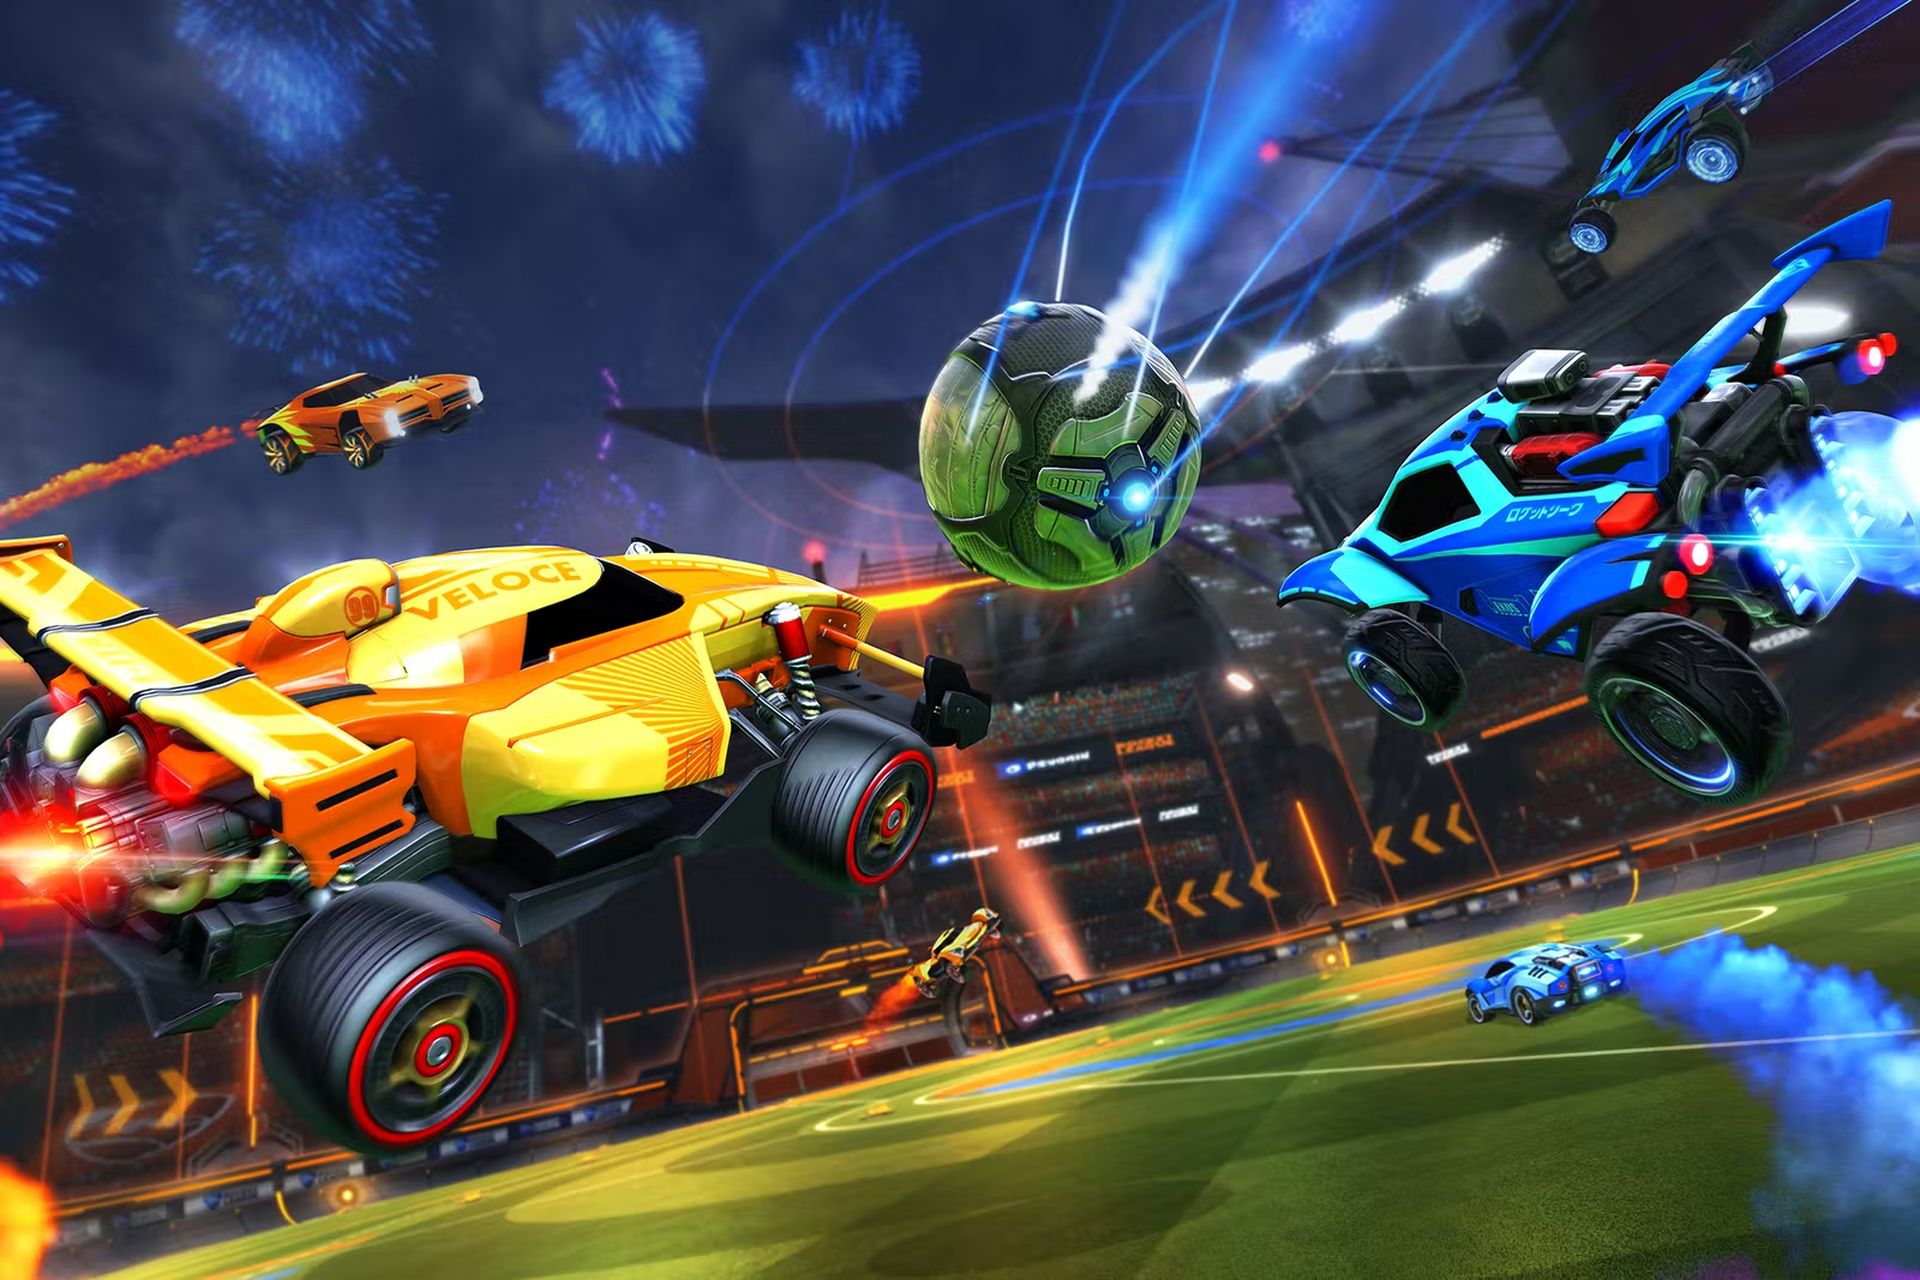 In this article, we are going to be covering the Rocket League codes for July 2022, so you can claim and enjoy the freebies that the game has to offer.